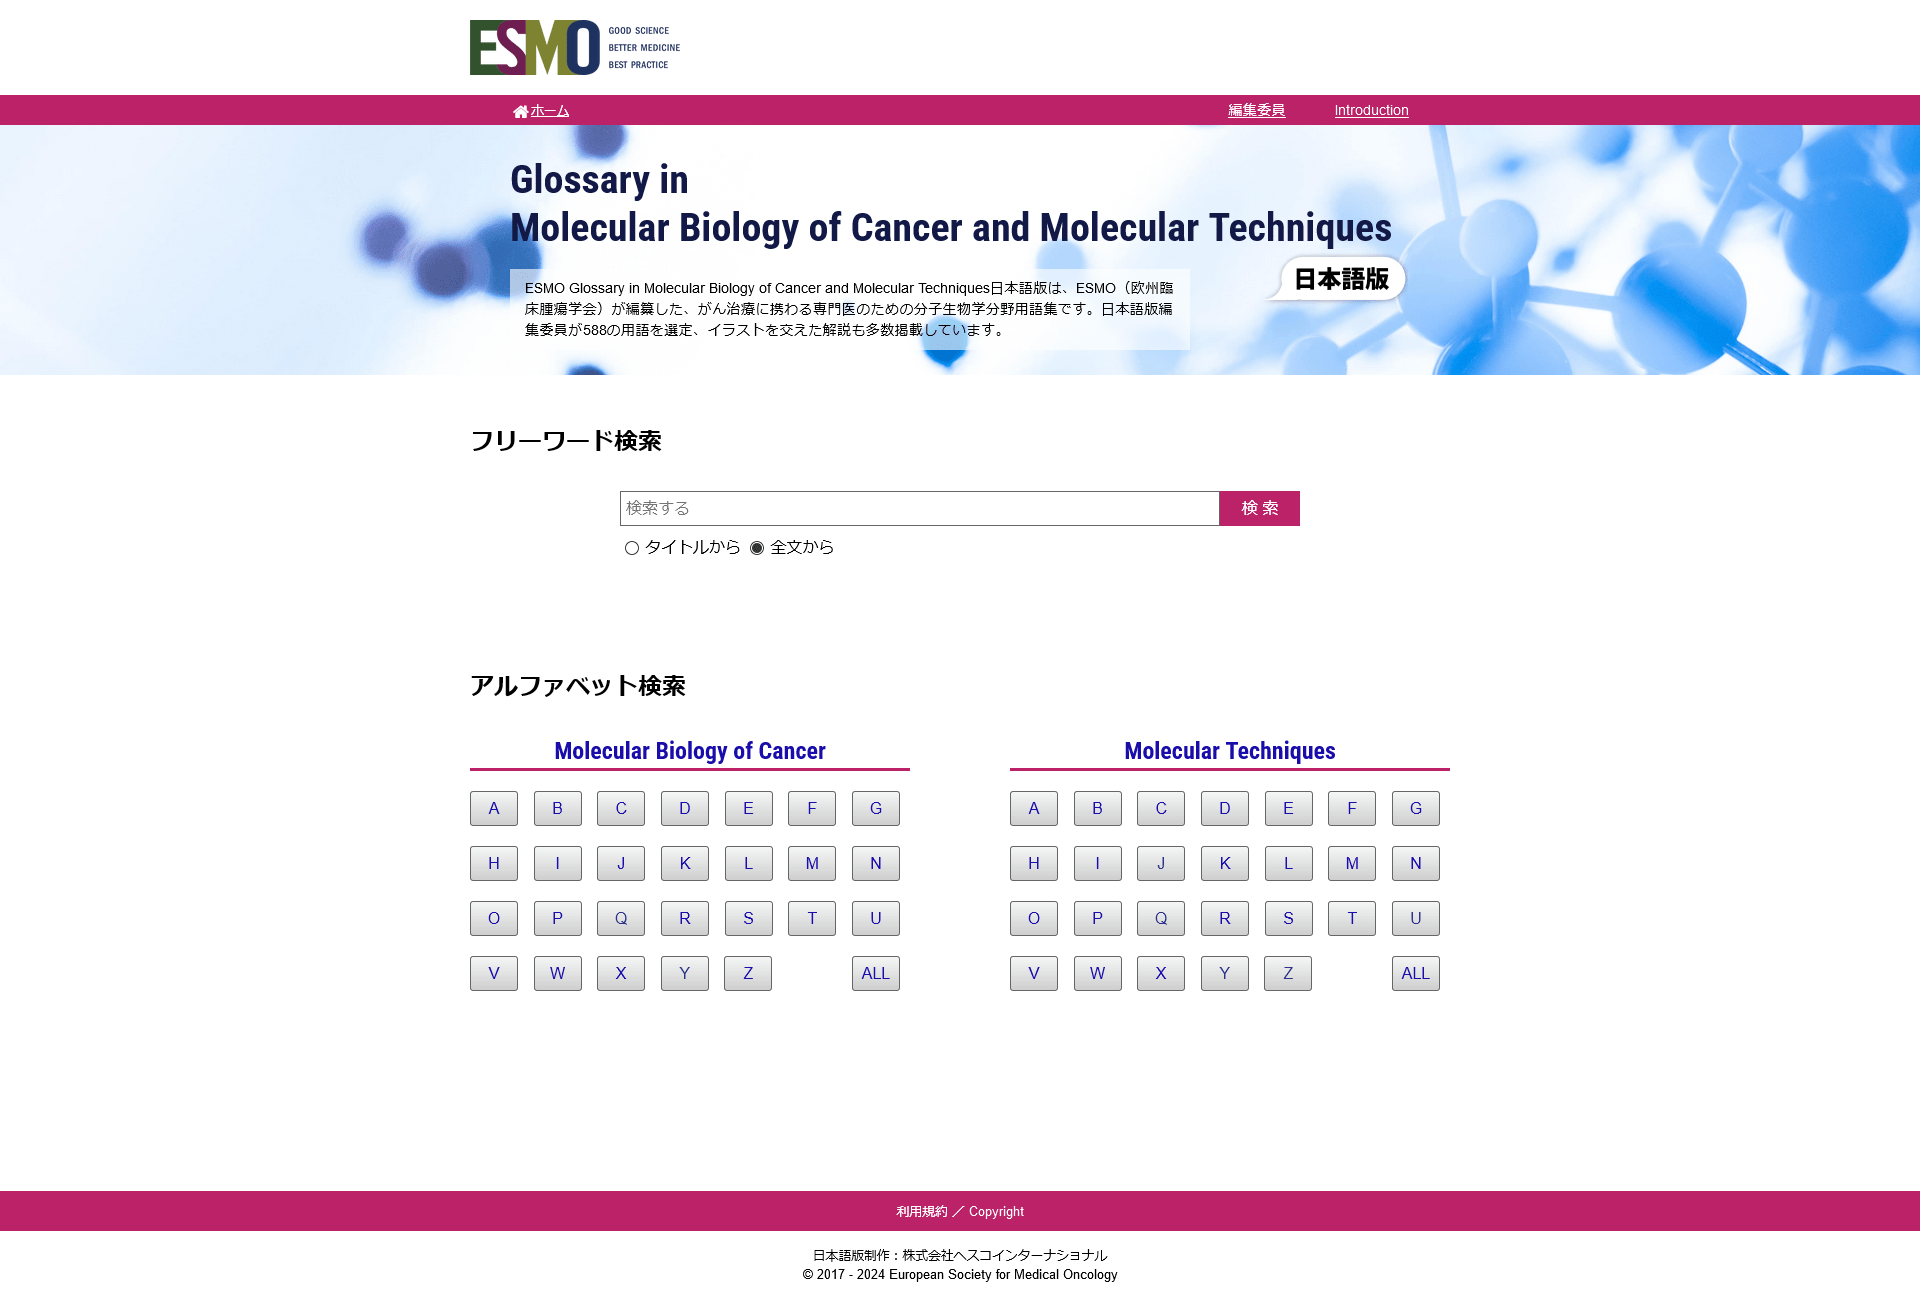 ESMO Glossary in Molecular Biology of Cancer and Molecular Techniques日本語版スクリーンショット